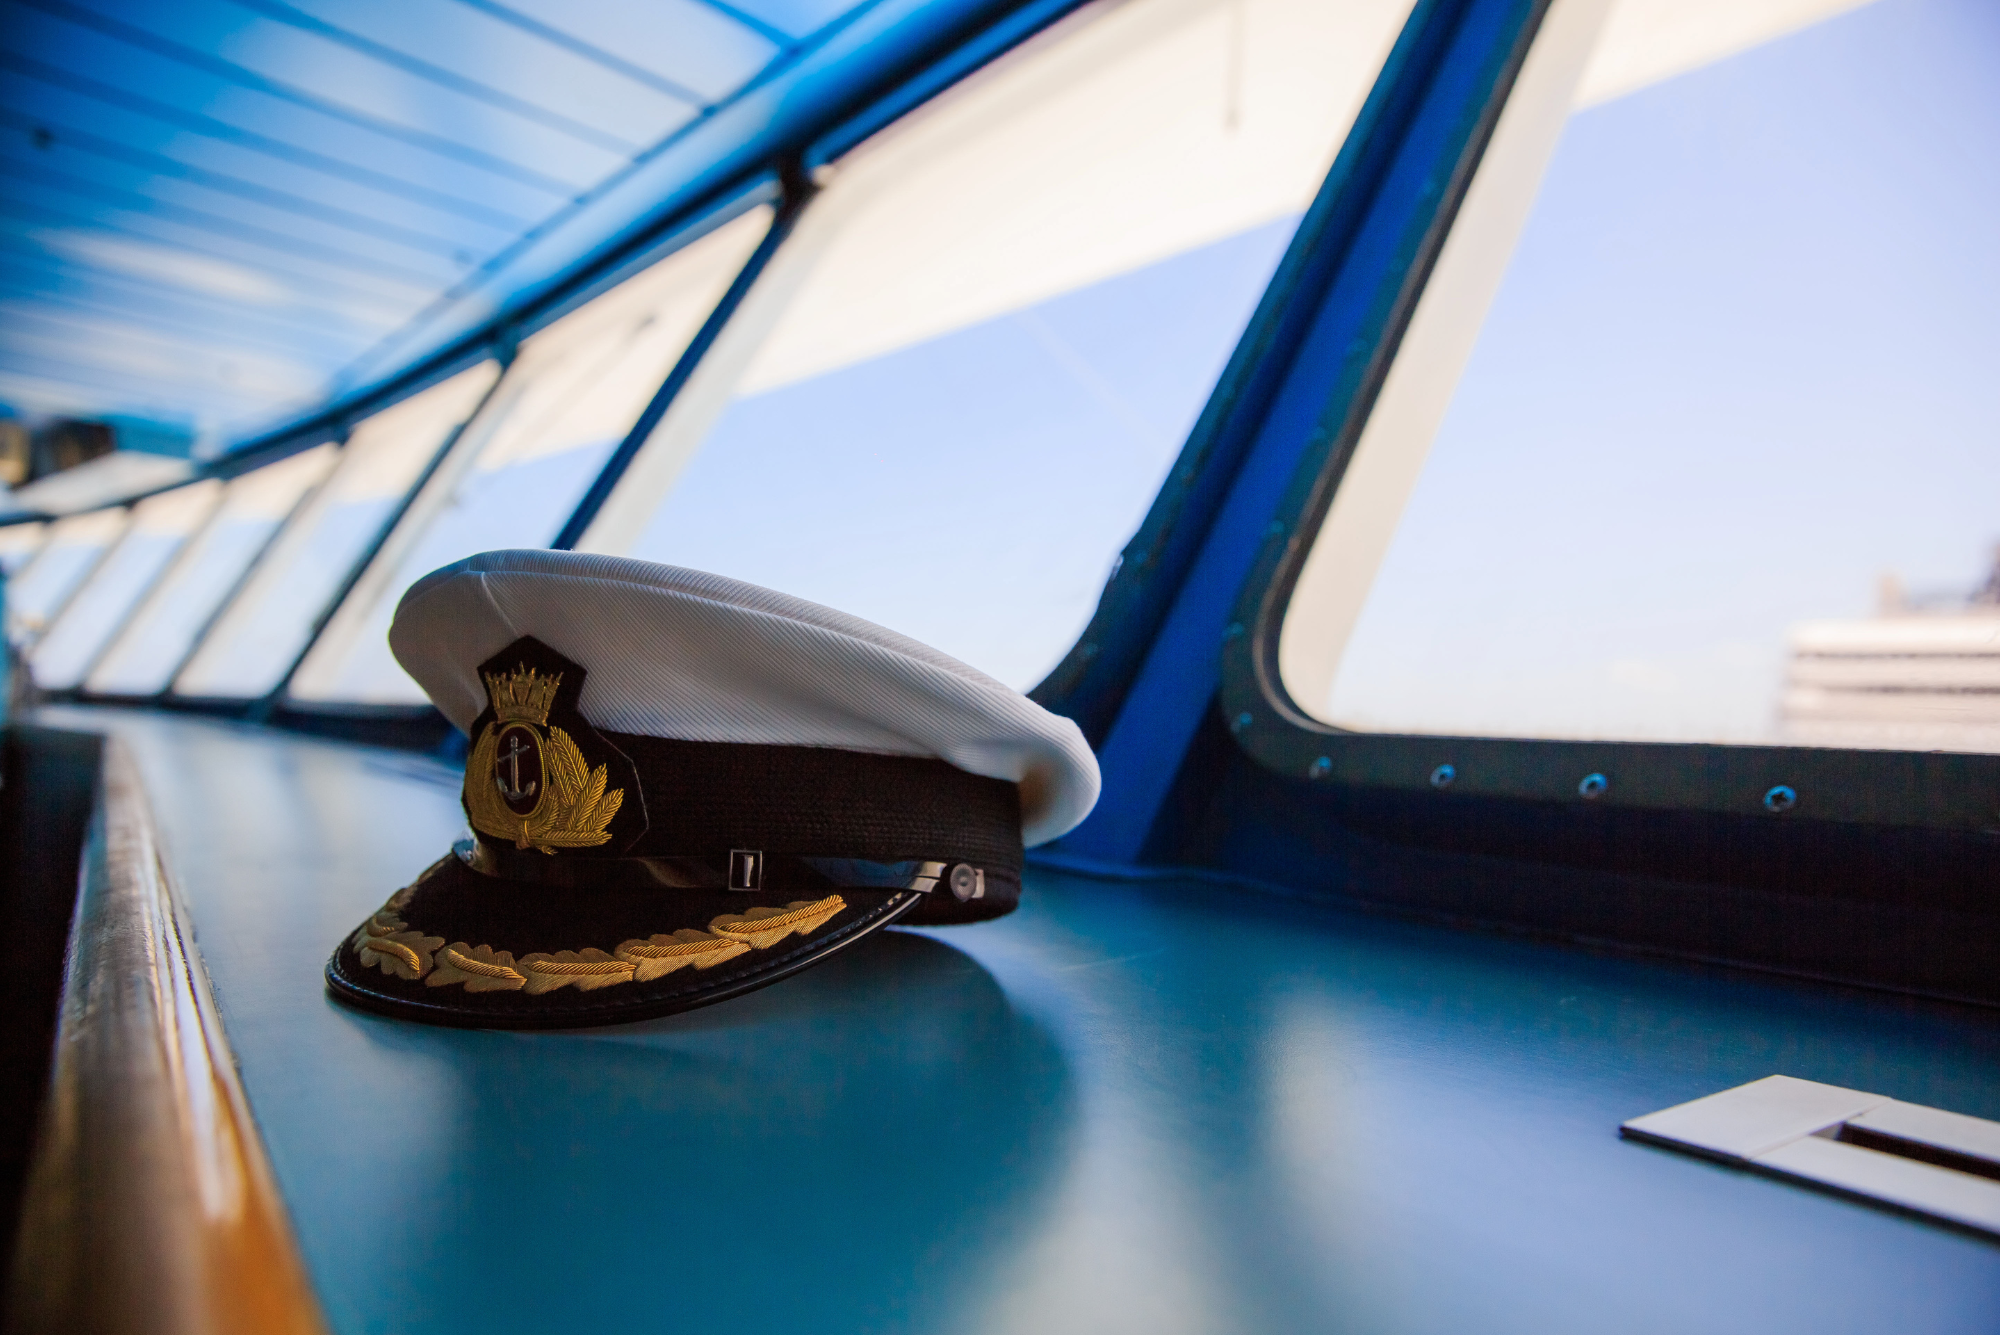 A captain’s hat aboard a boat, after the achievement of completing the captain license requirements.